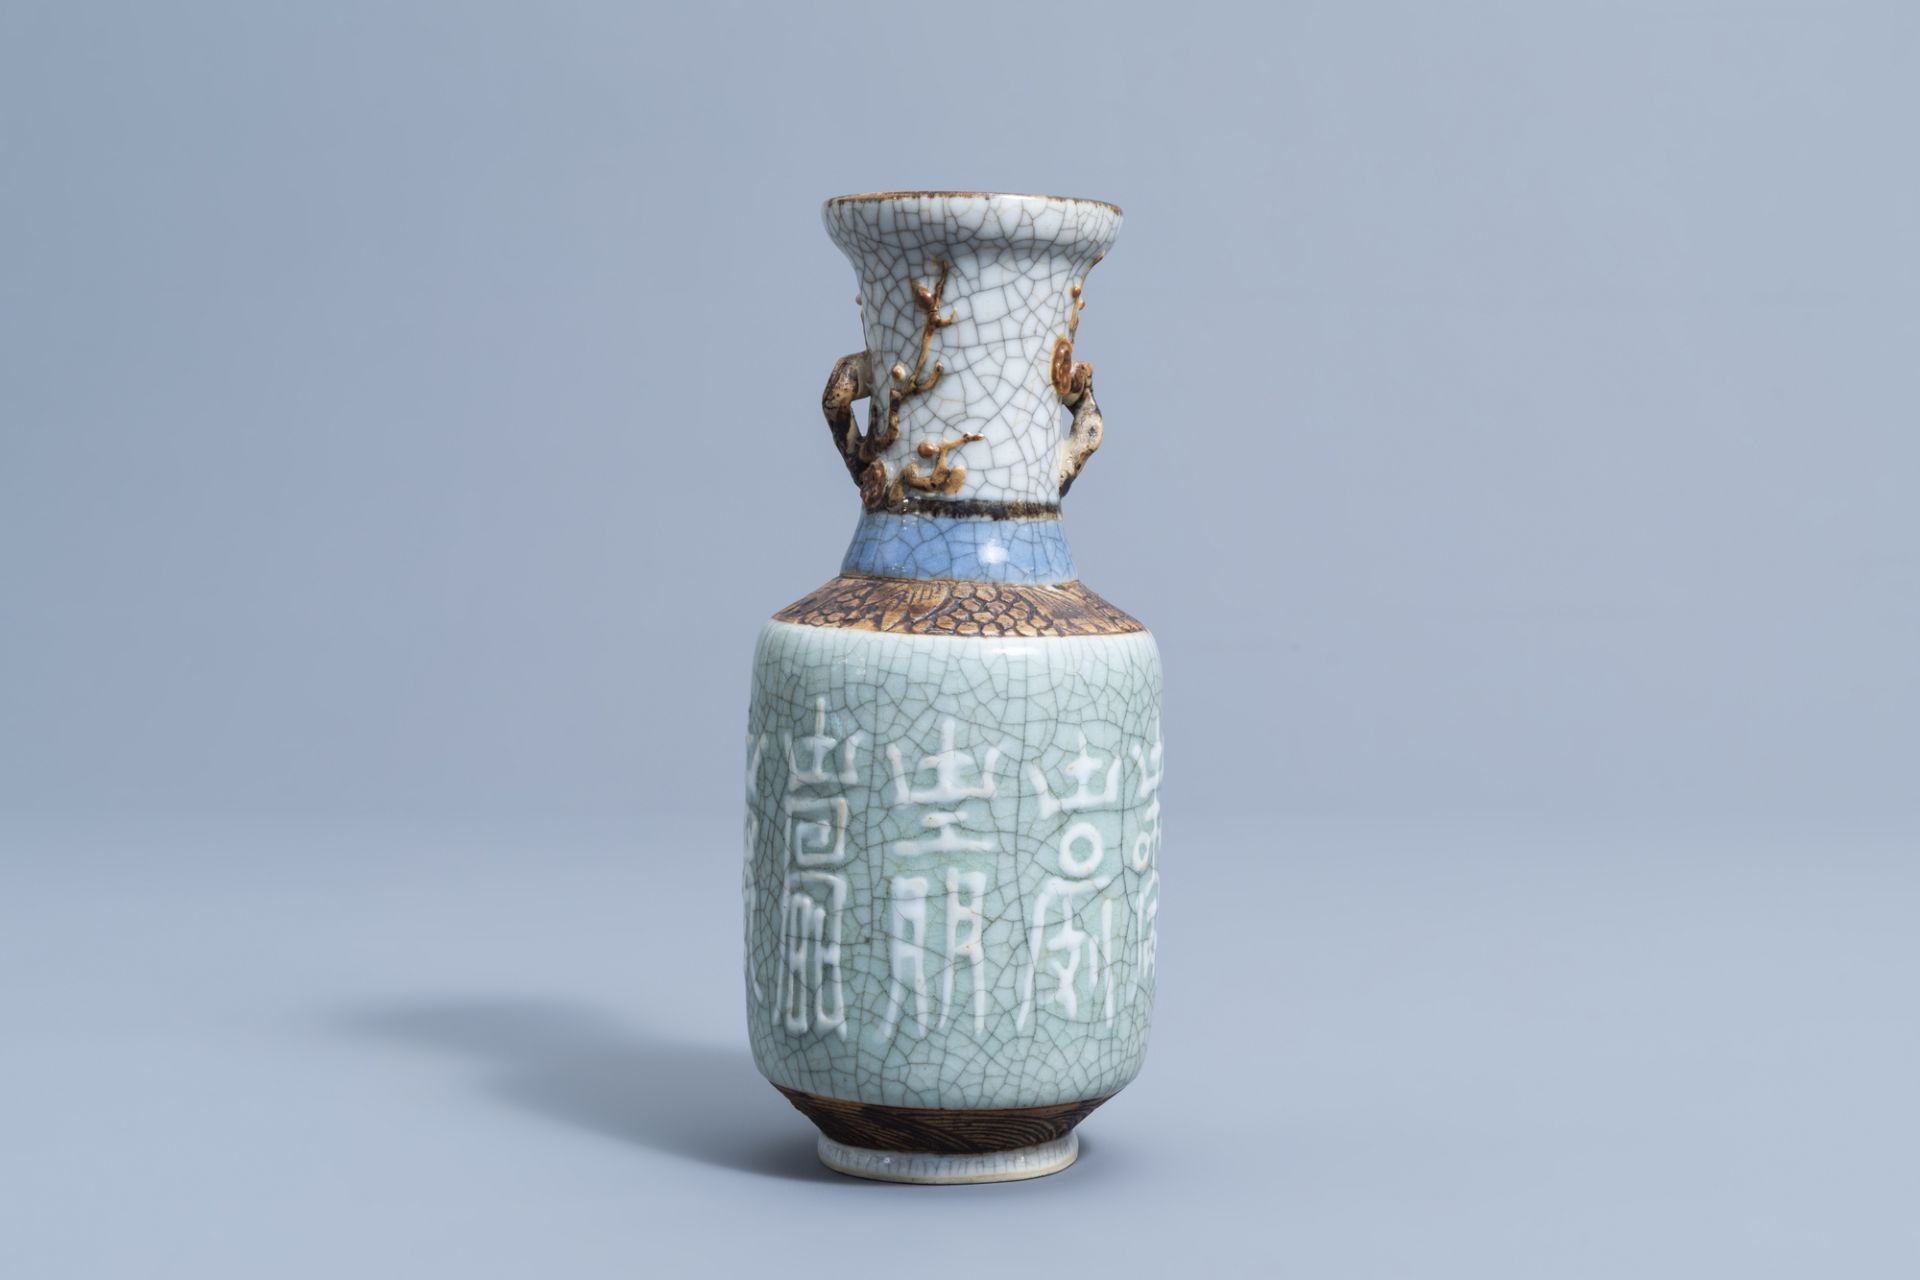 A Chinese Nanking crackle glazed celadon vase with relief design, 19th C.